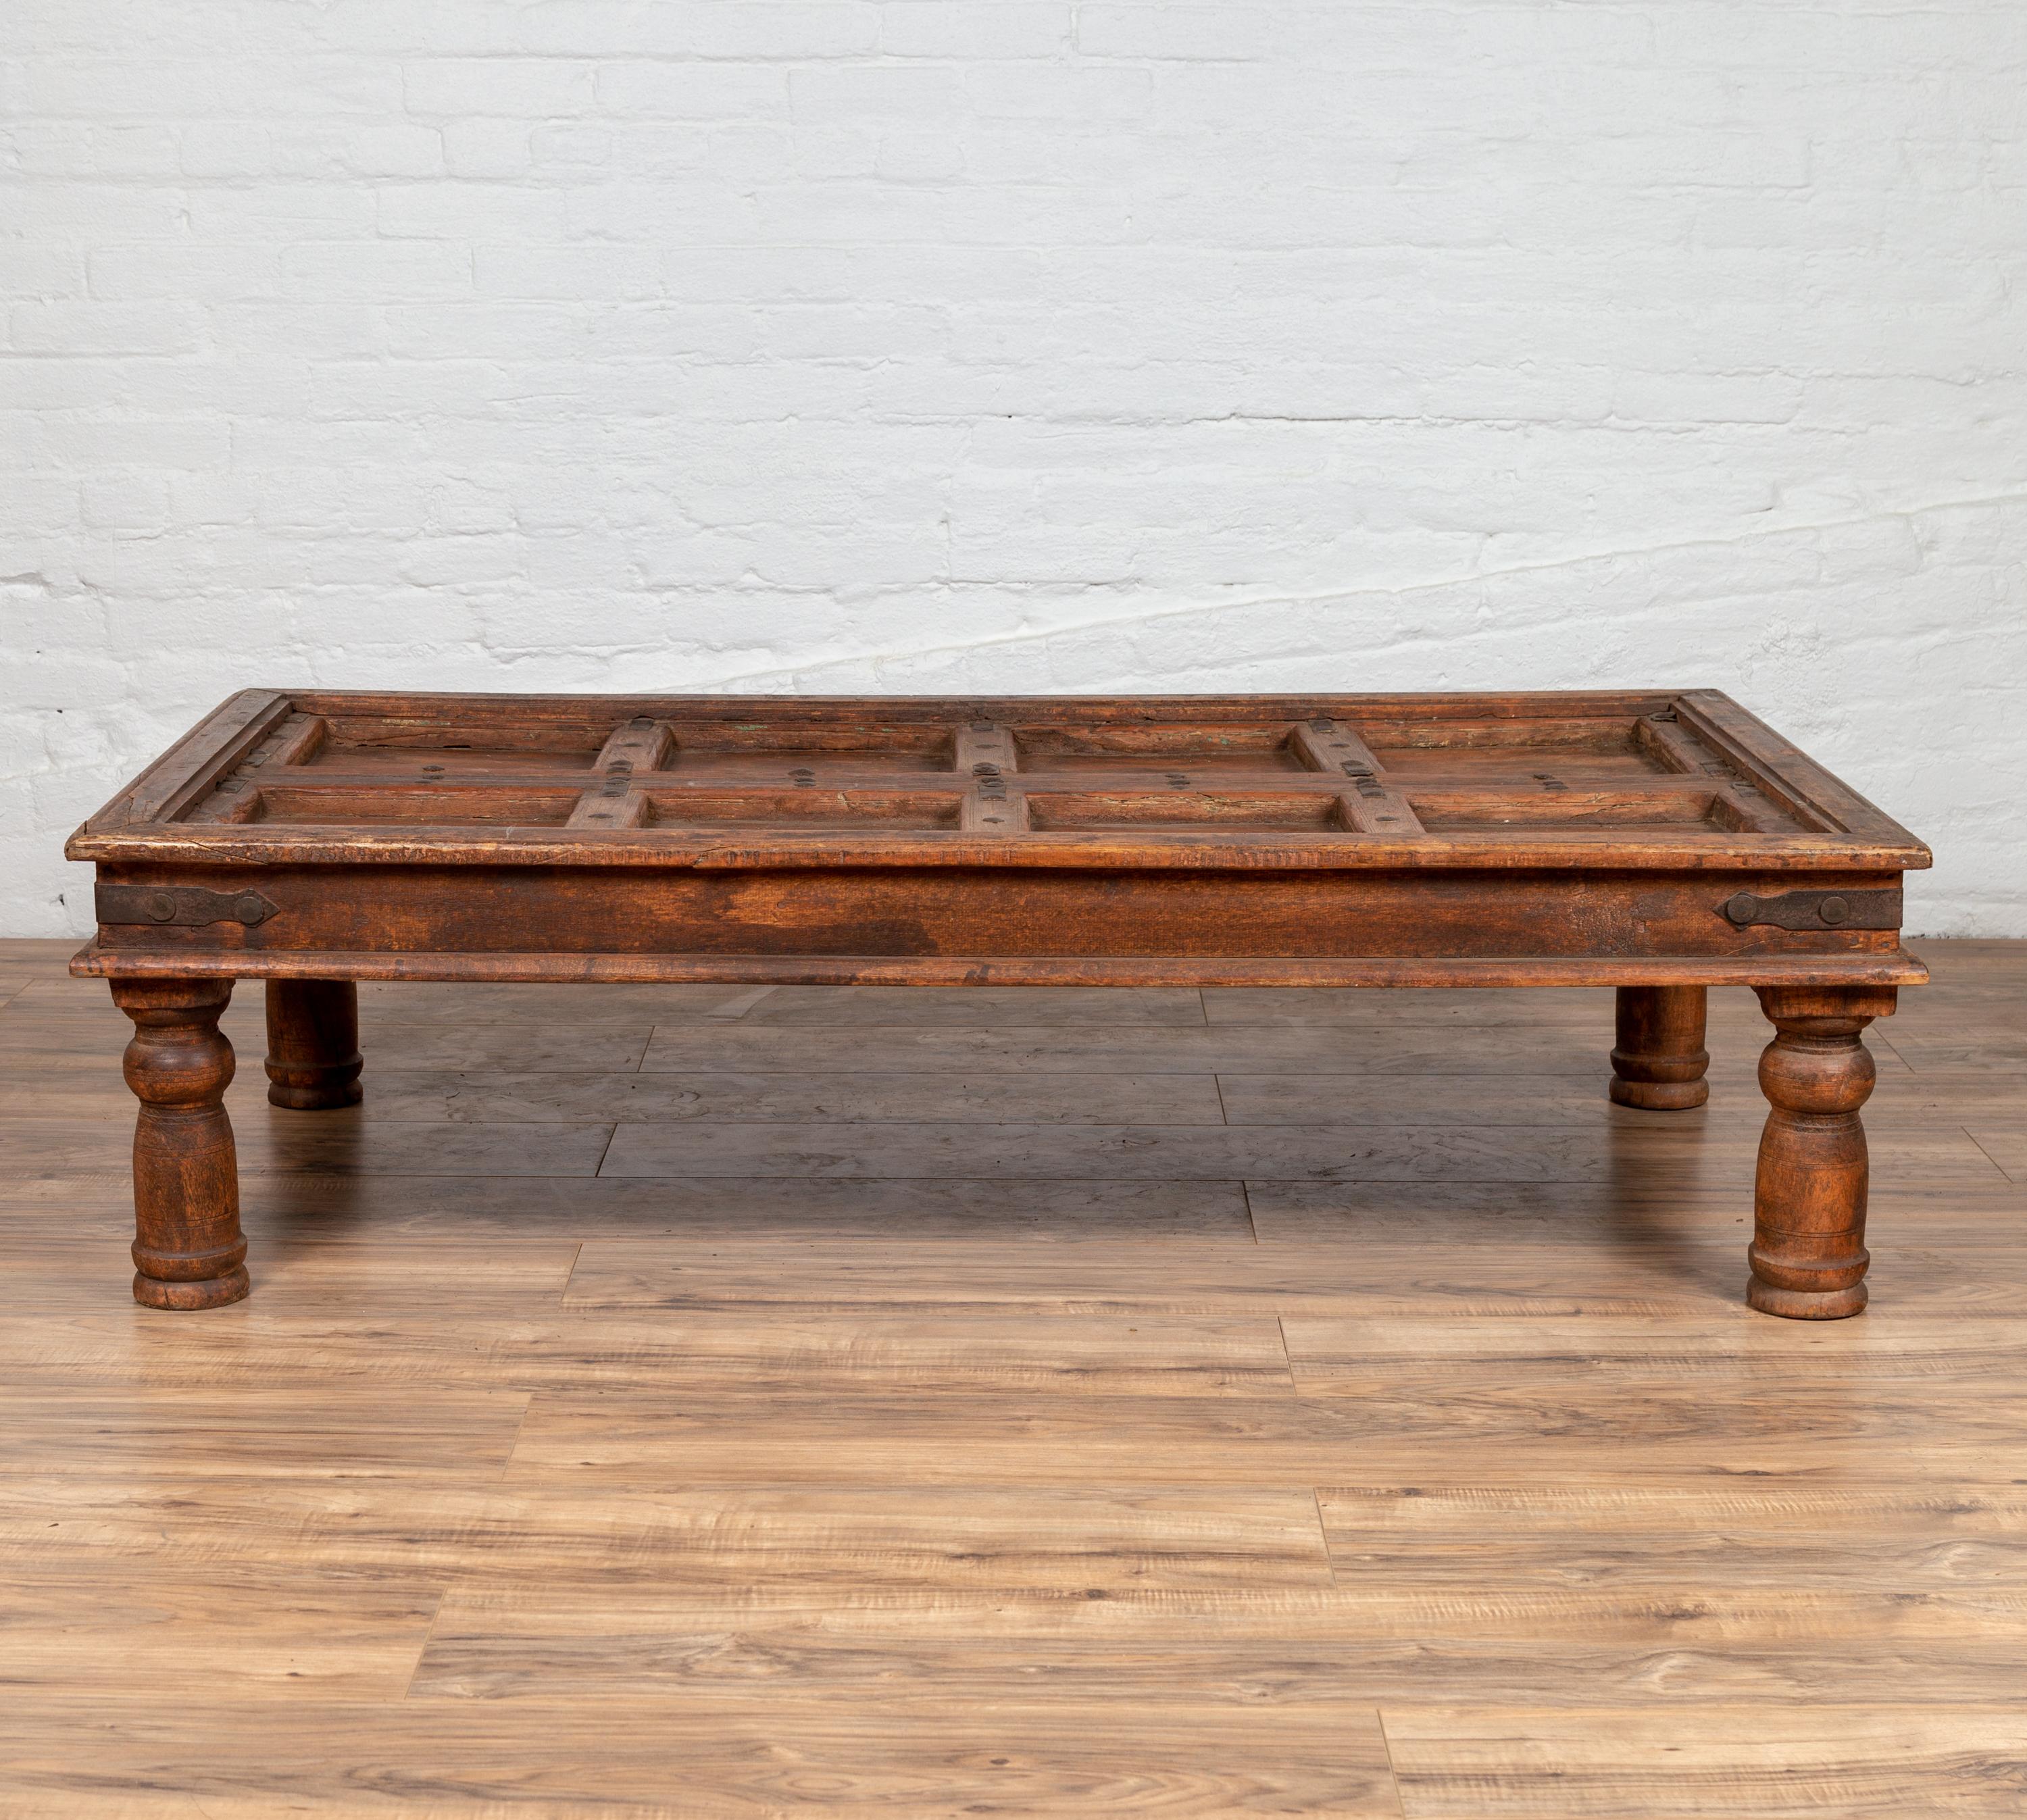 An antique Indian palace door made into a coffee table with sheesham wood and iron studs. Born in India during the early years of the 20th century, this charming palace door has been made into a coffee table. The top, presenting a succession of